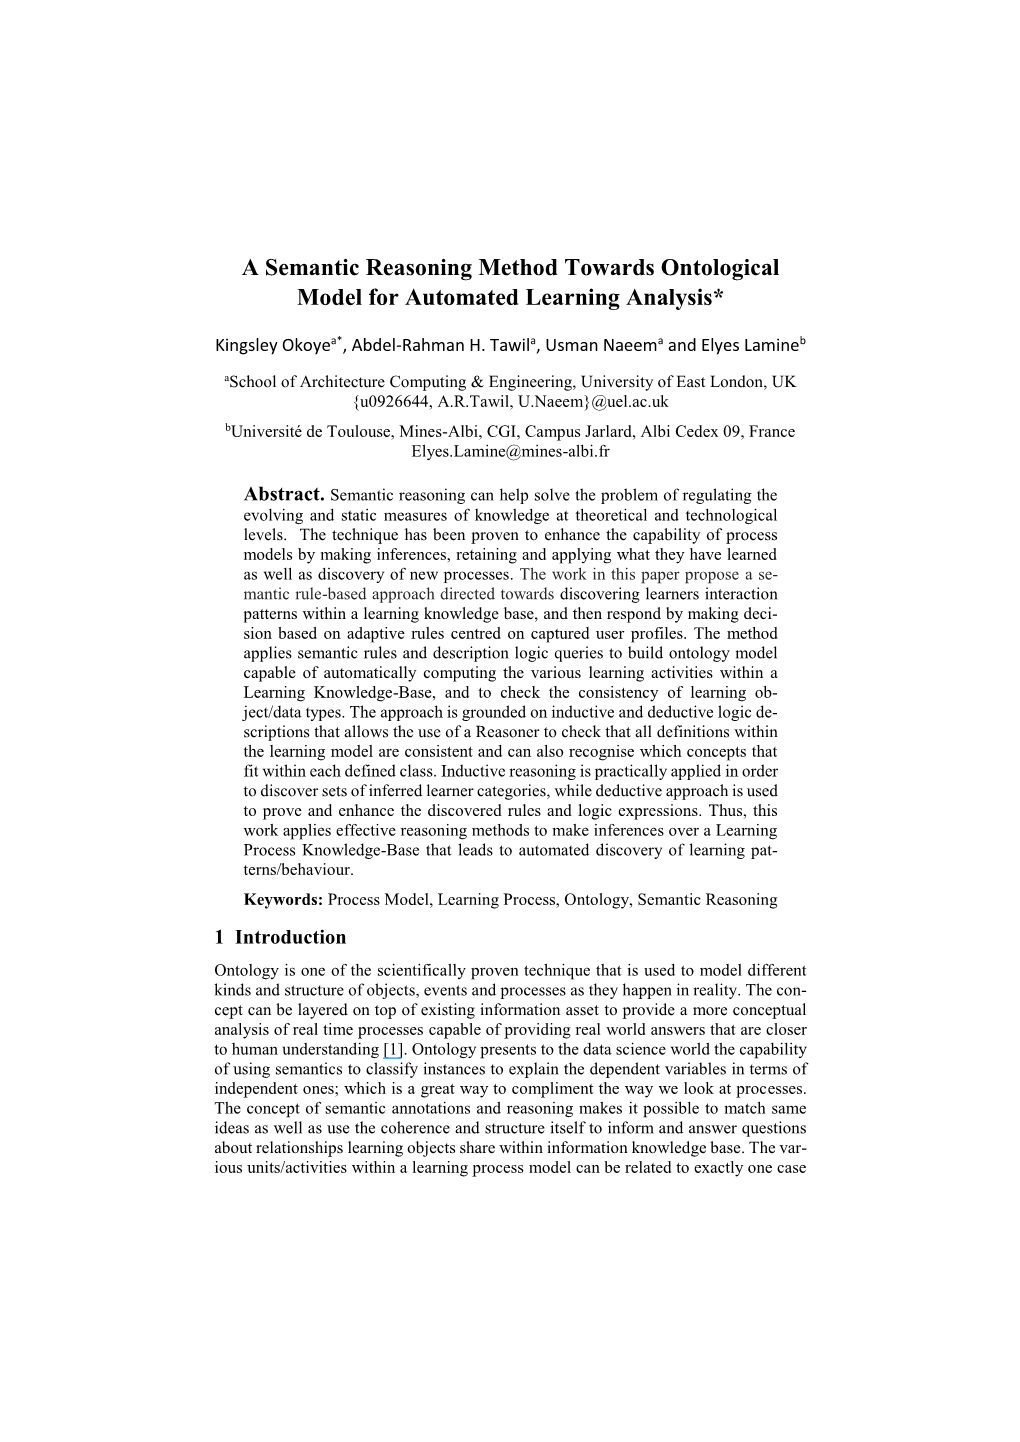 A Semantic Reasoning Method Towards Ontological Model for Automated Learning Analysis*